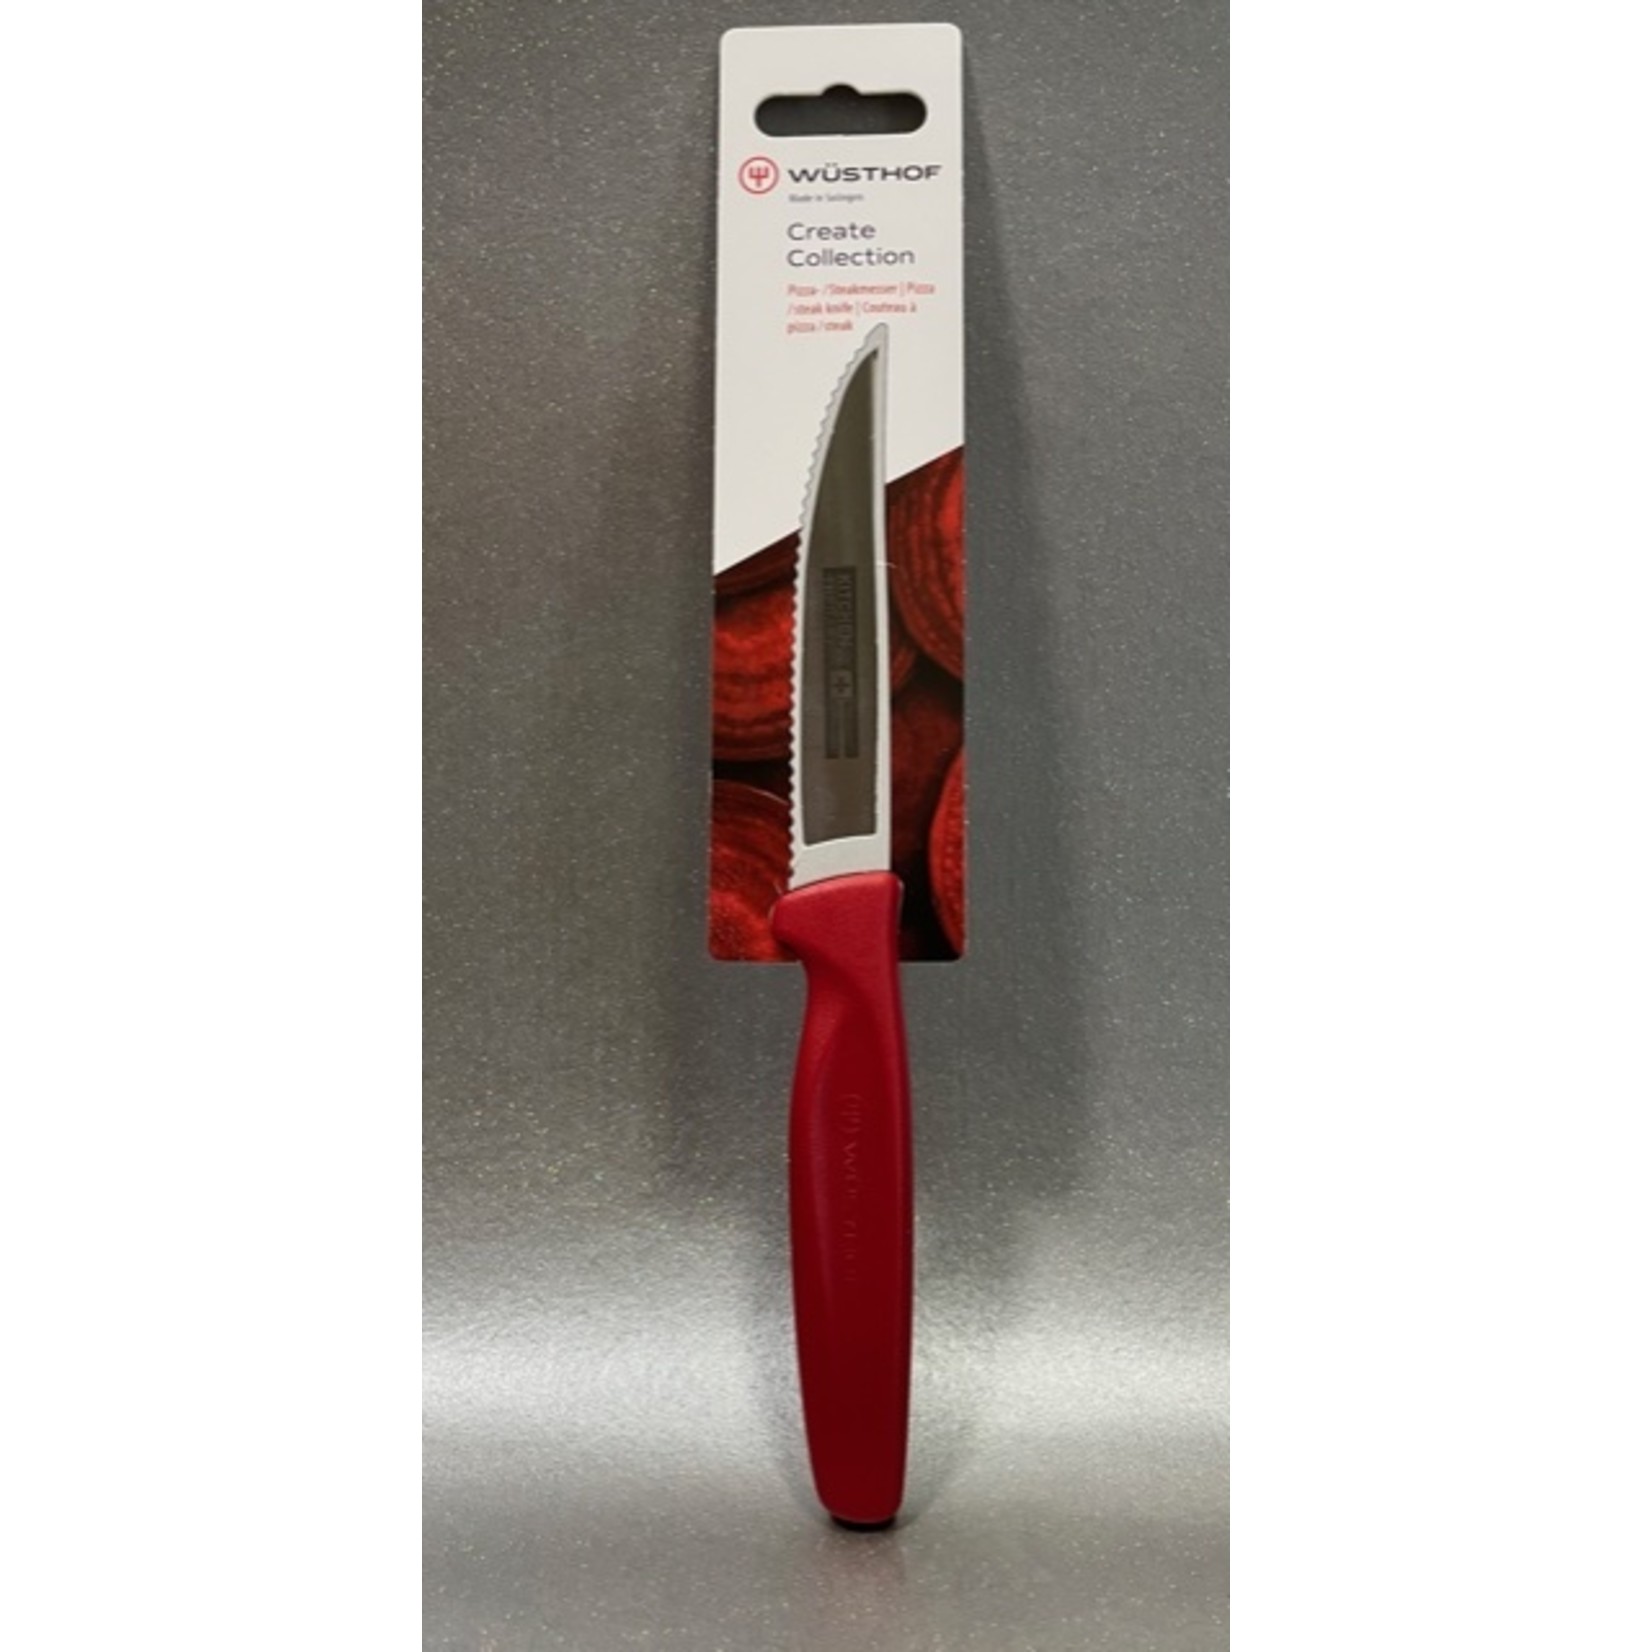 WUSTHOF WUSTHOF Kitchen Therapy Serrated Pizza / Steak Knife  4" - Red